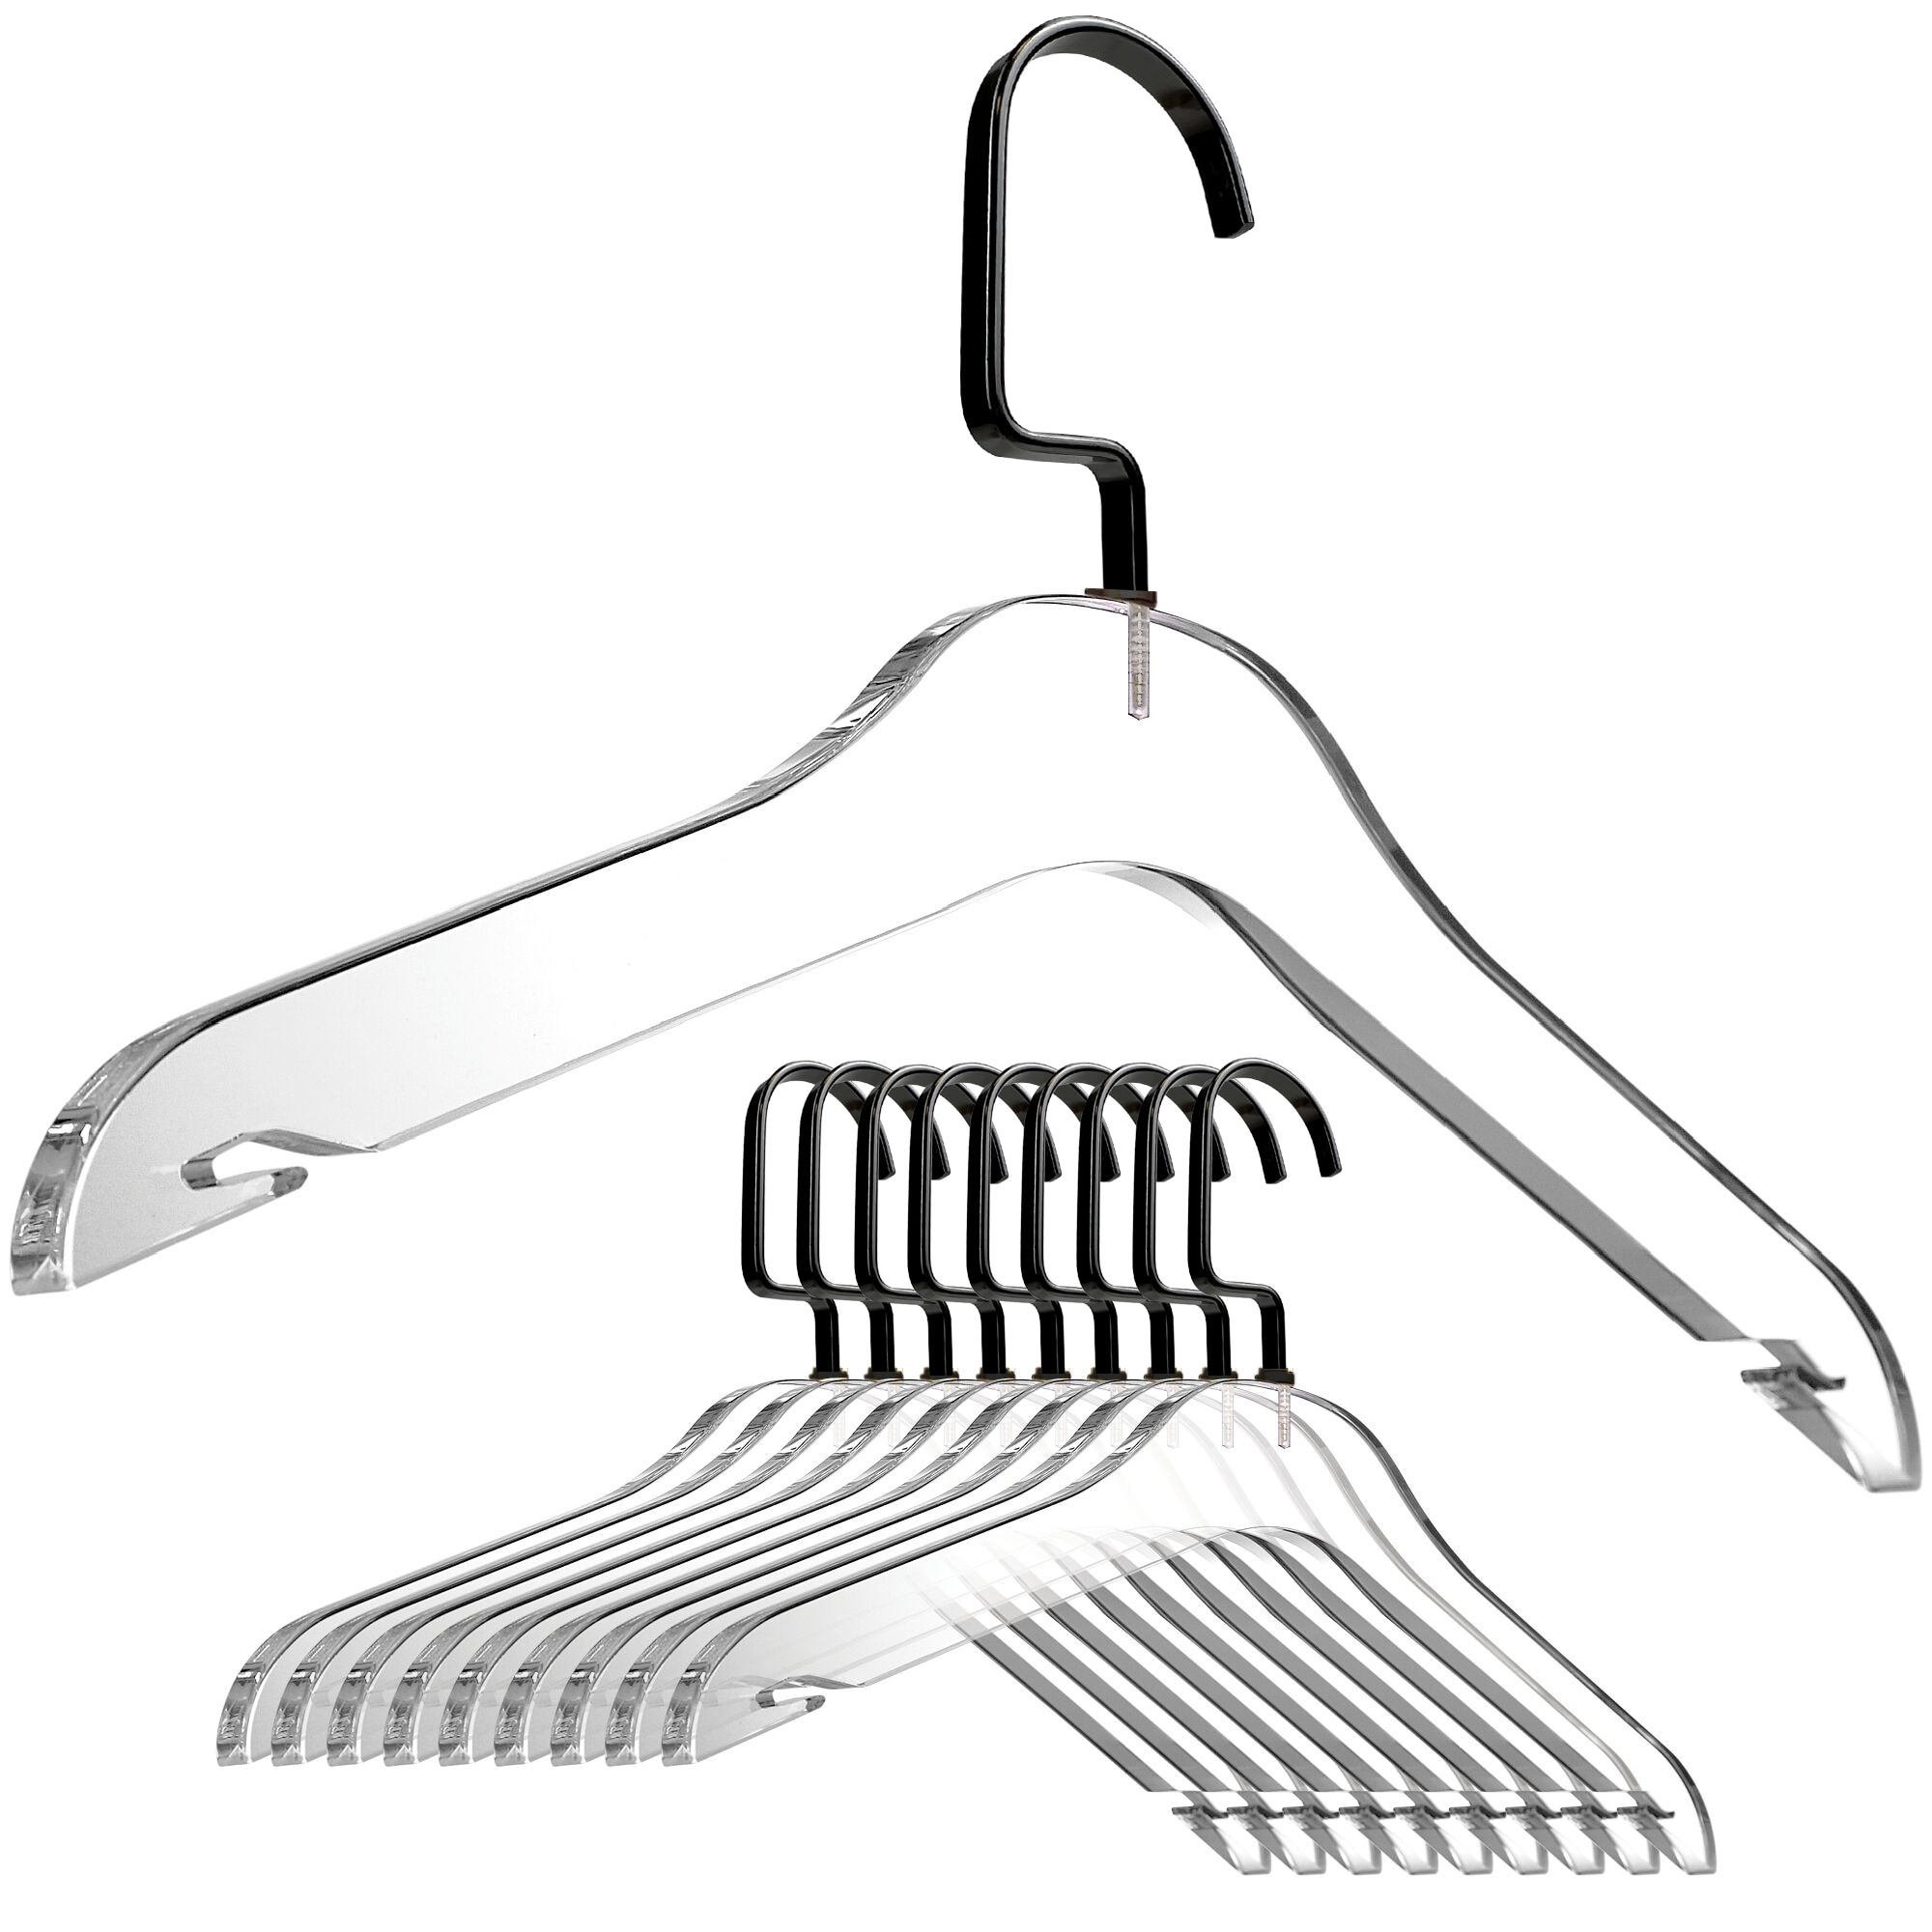 6 Blank Acrylic Hangers, Plain Clear Acrylic Clothes Dividers, Dry-erase Closet  Organizers, Perfect for Vinyl Decals 